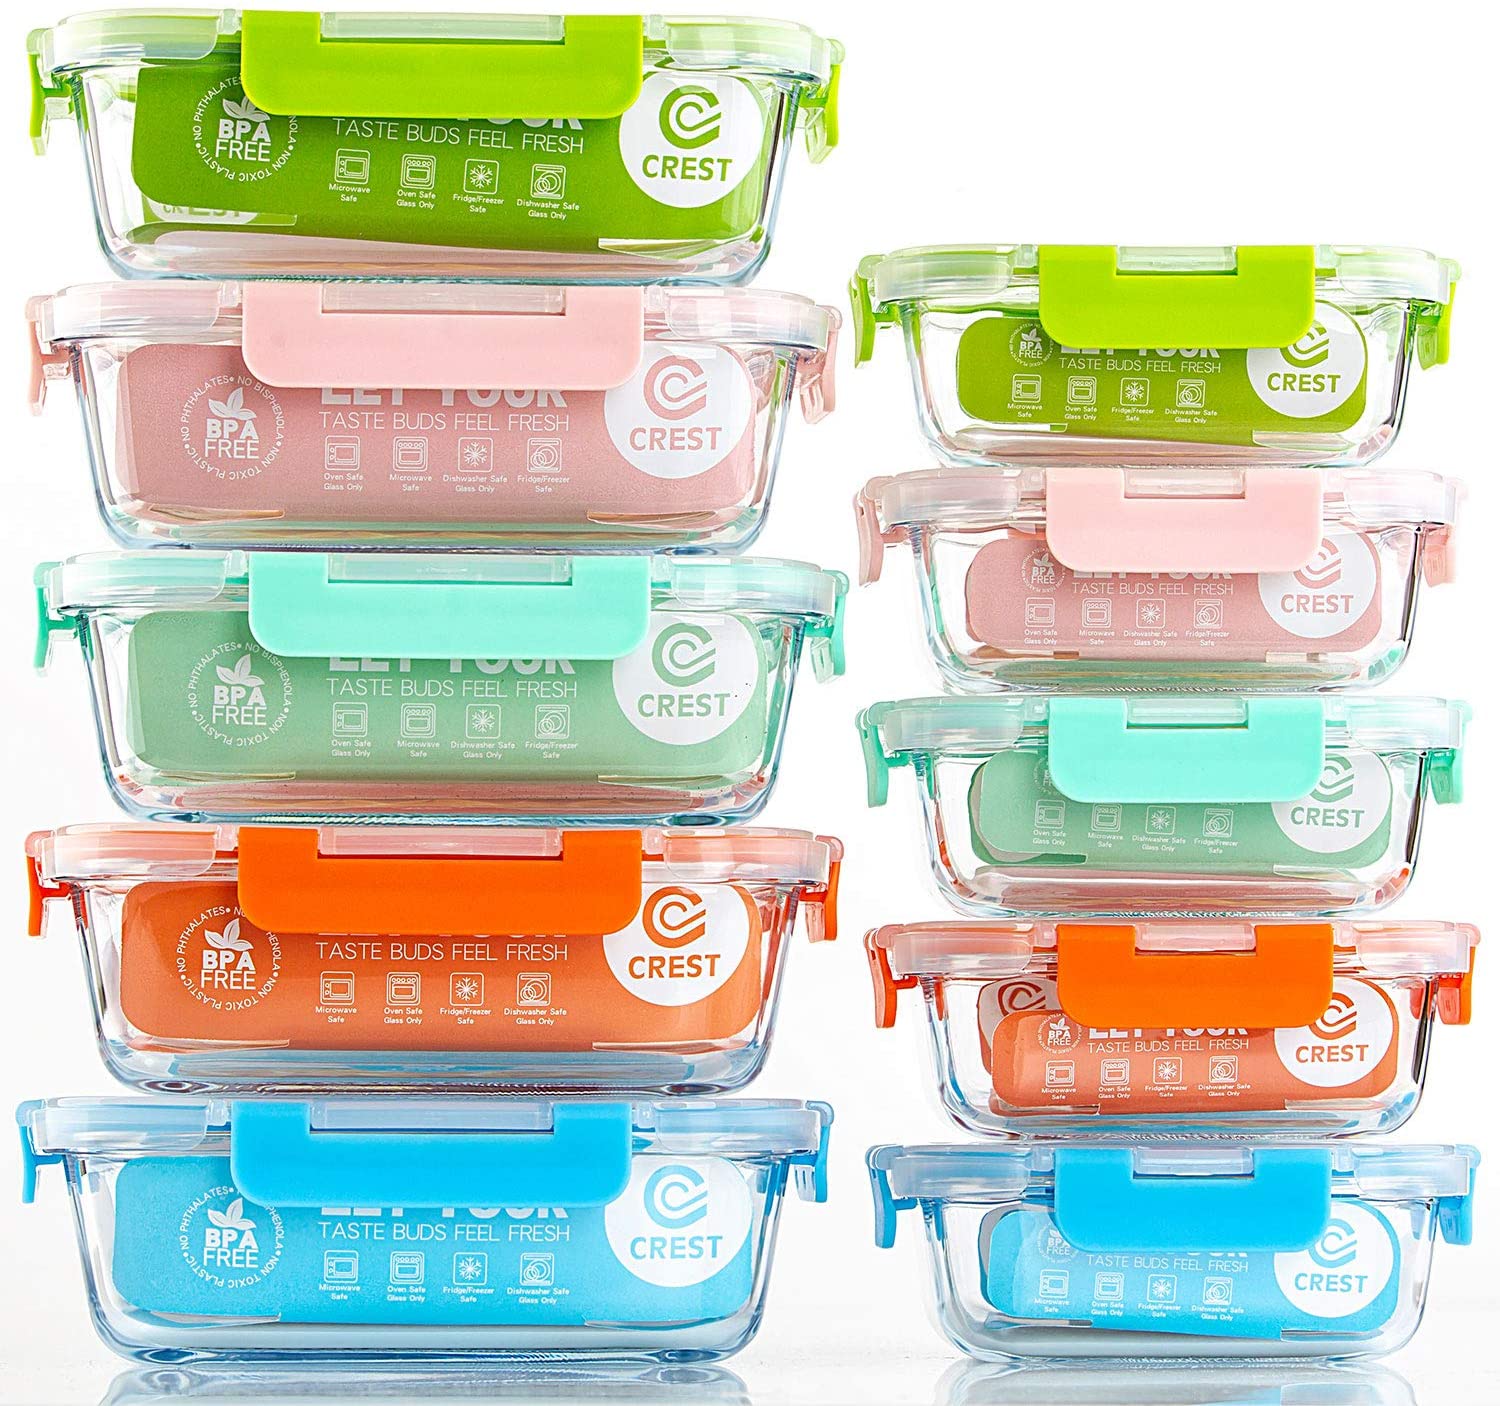 https://www.dontwasteyourmoney.com/wp-content/uploads/2020/09/c-crest-glass-food-storage-meal-prep-containers-10-pack-glass-food-storage.jpg